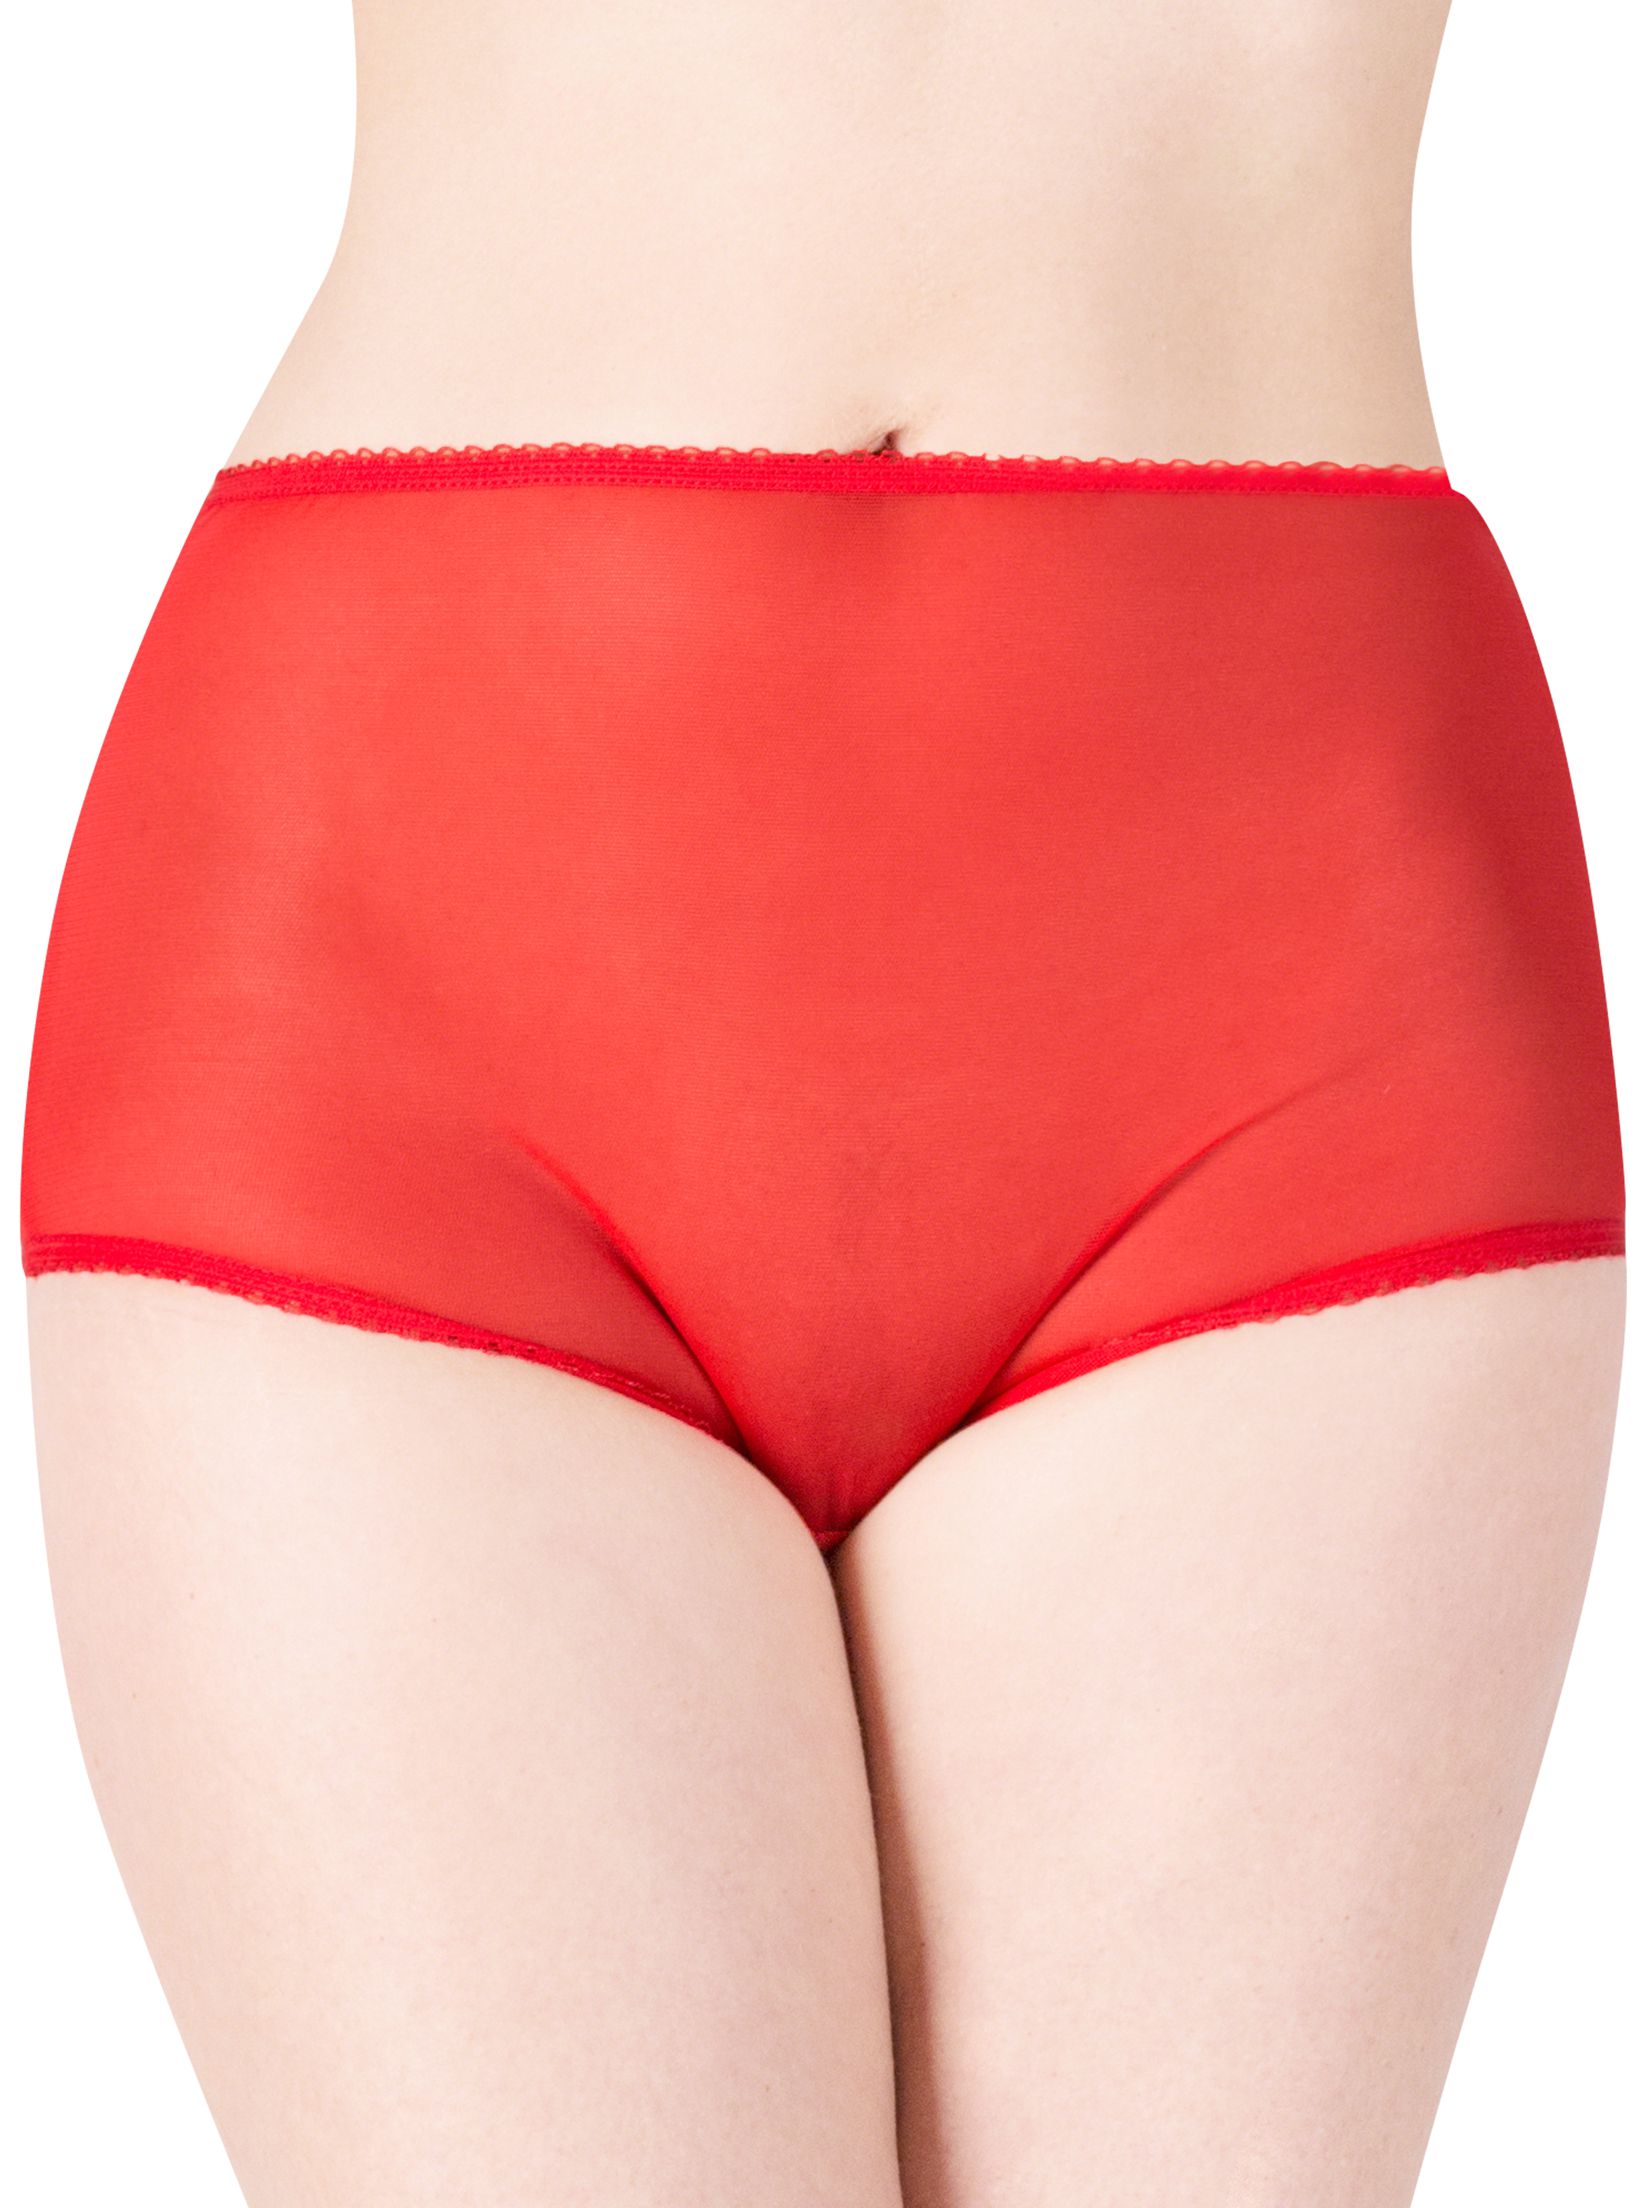 ny1028r_culotte-retro-50-s-pin-up-rockabilly-glamour-taille-haute-rouge